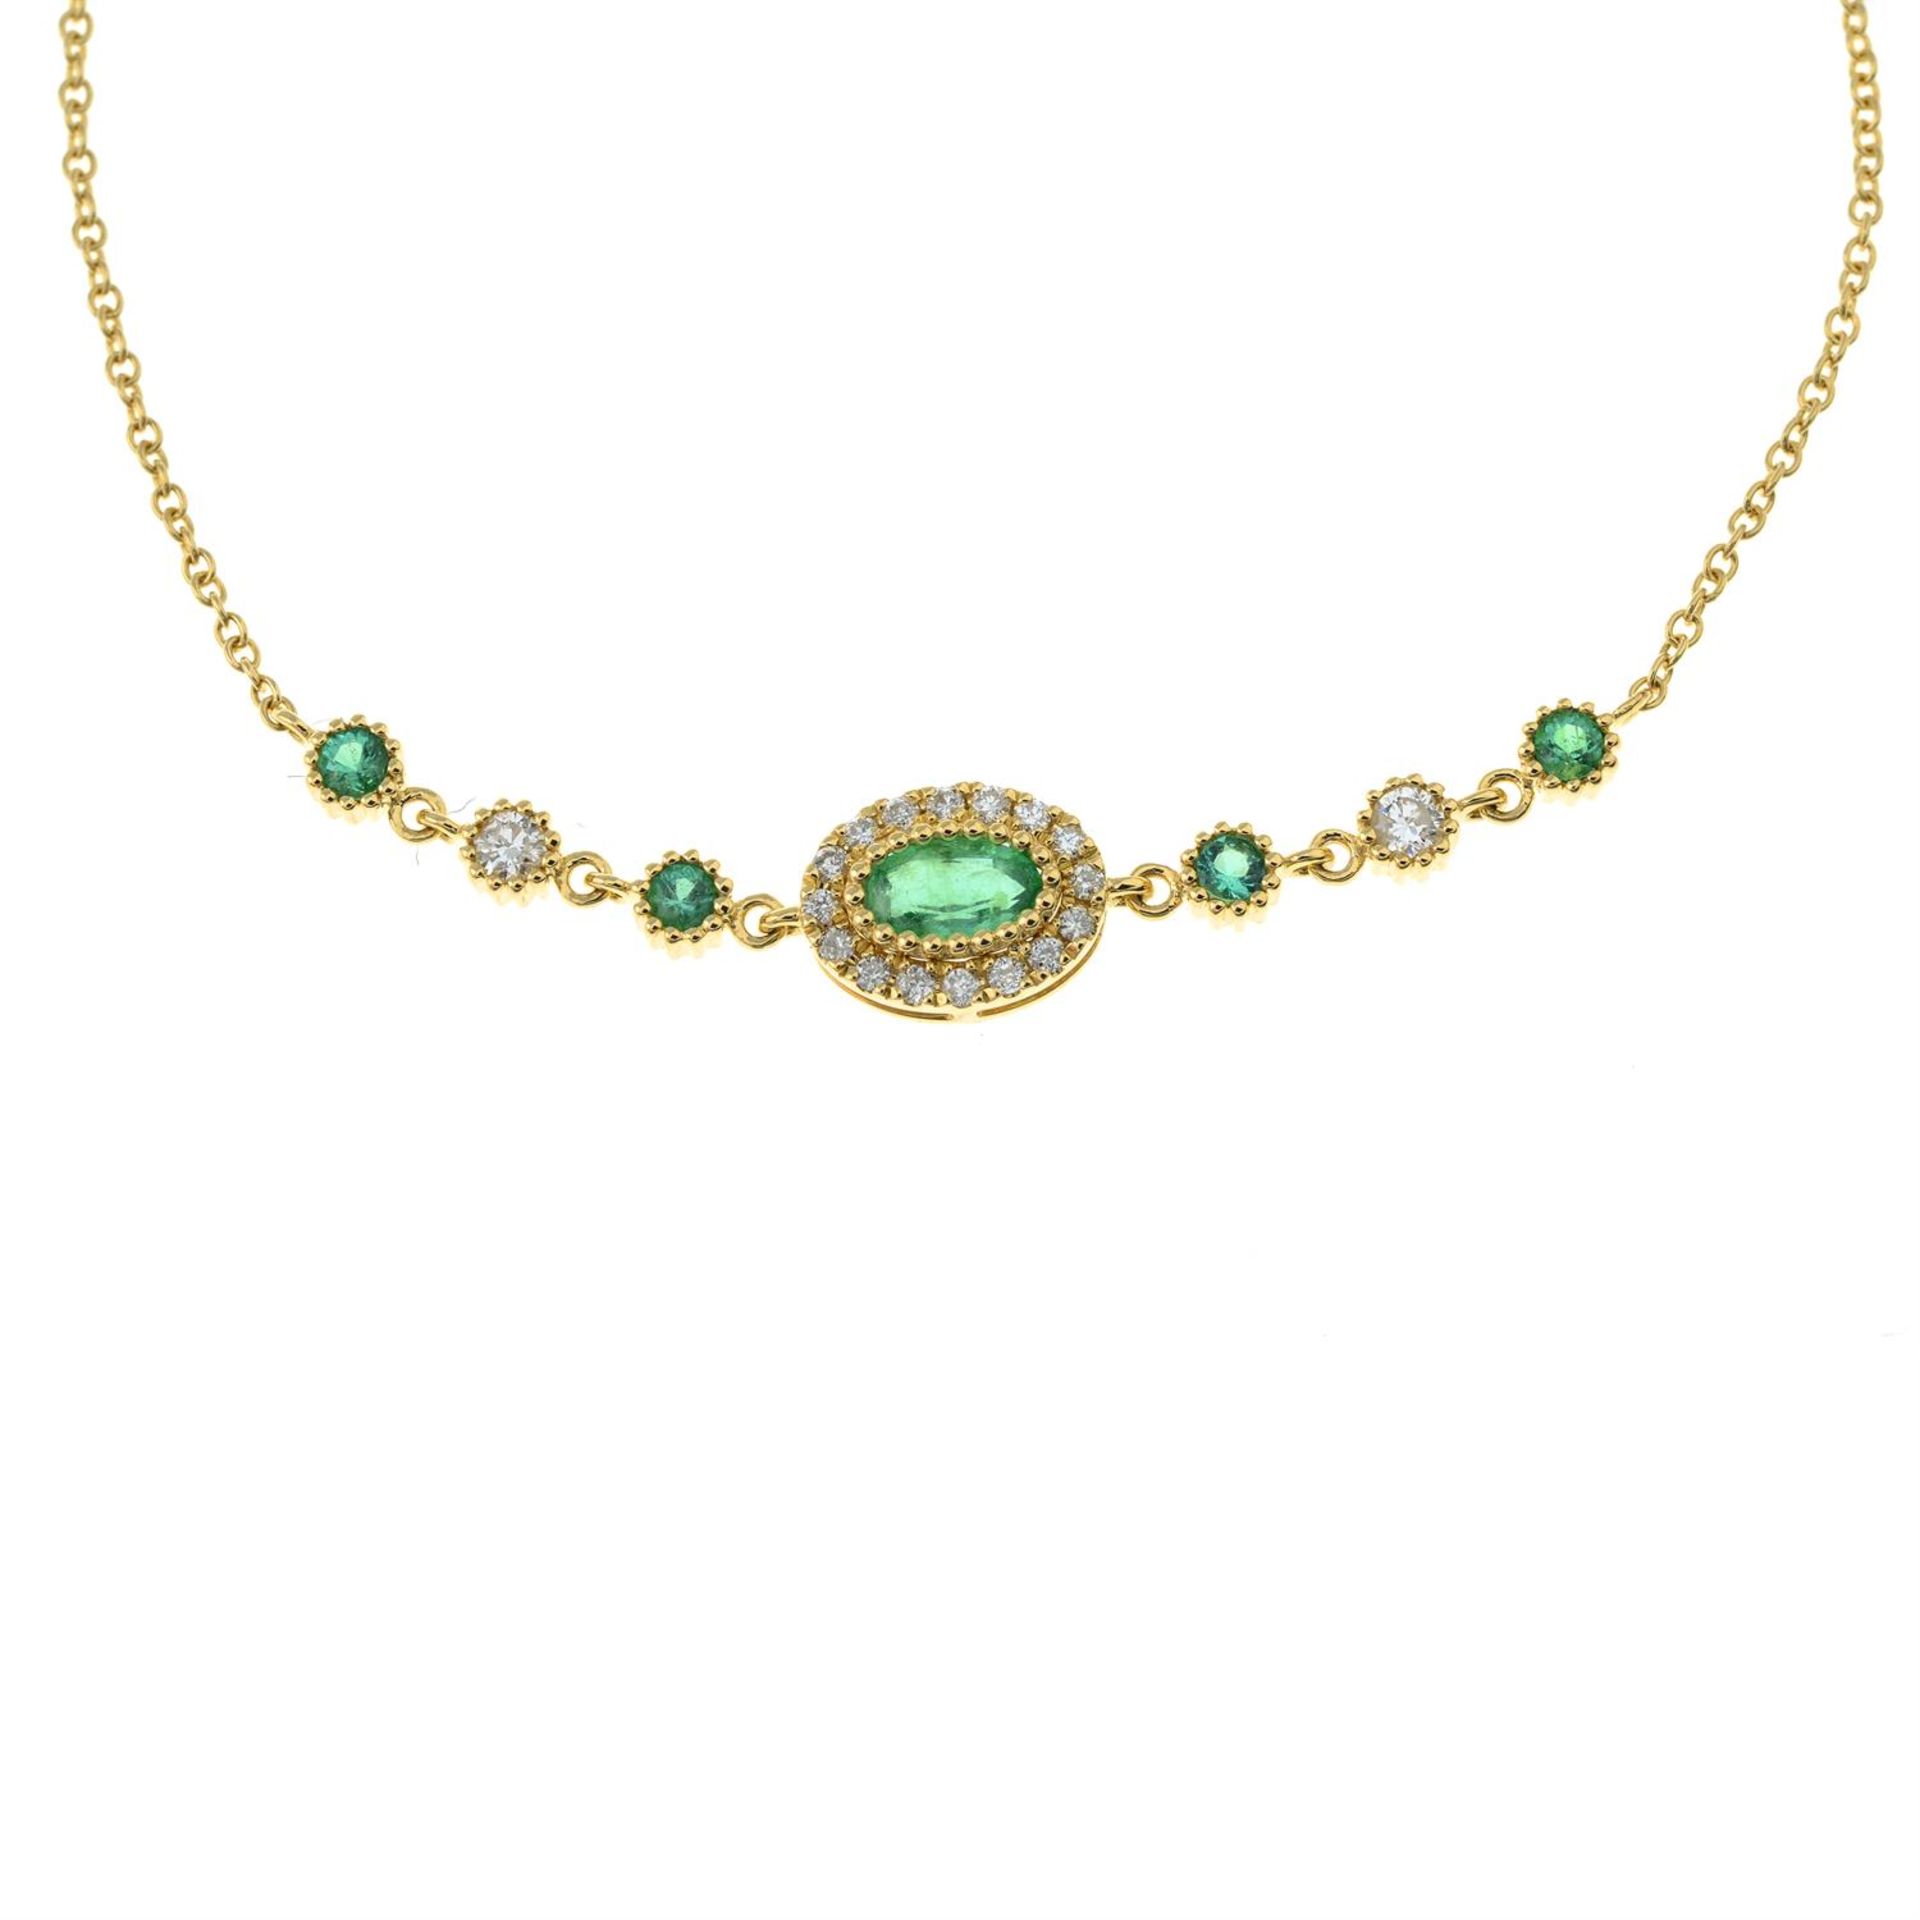 An 18ct gold emerald and diamond bracelet. - Image 2 of 3